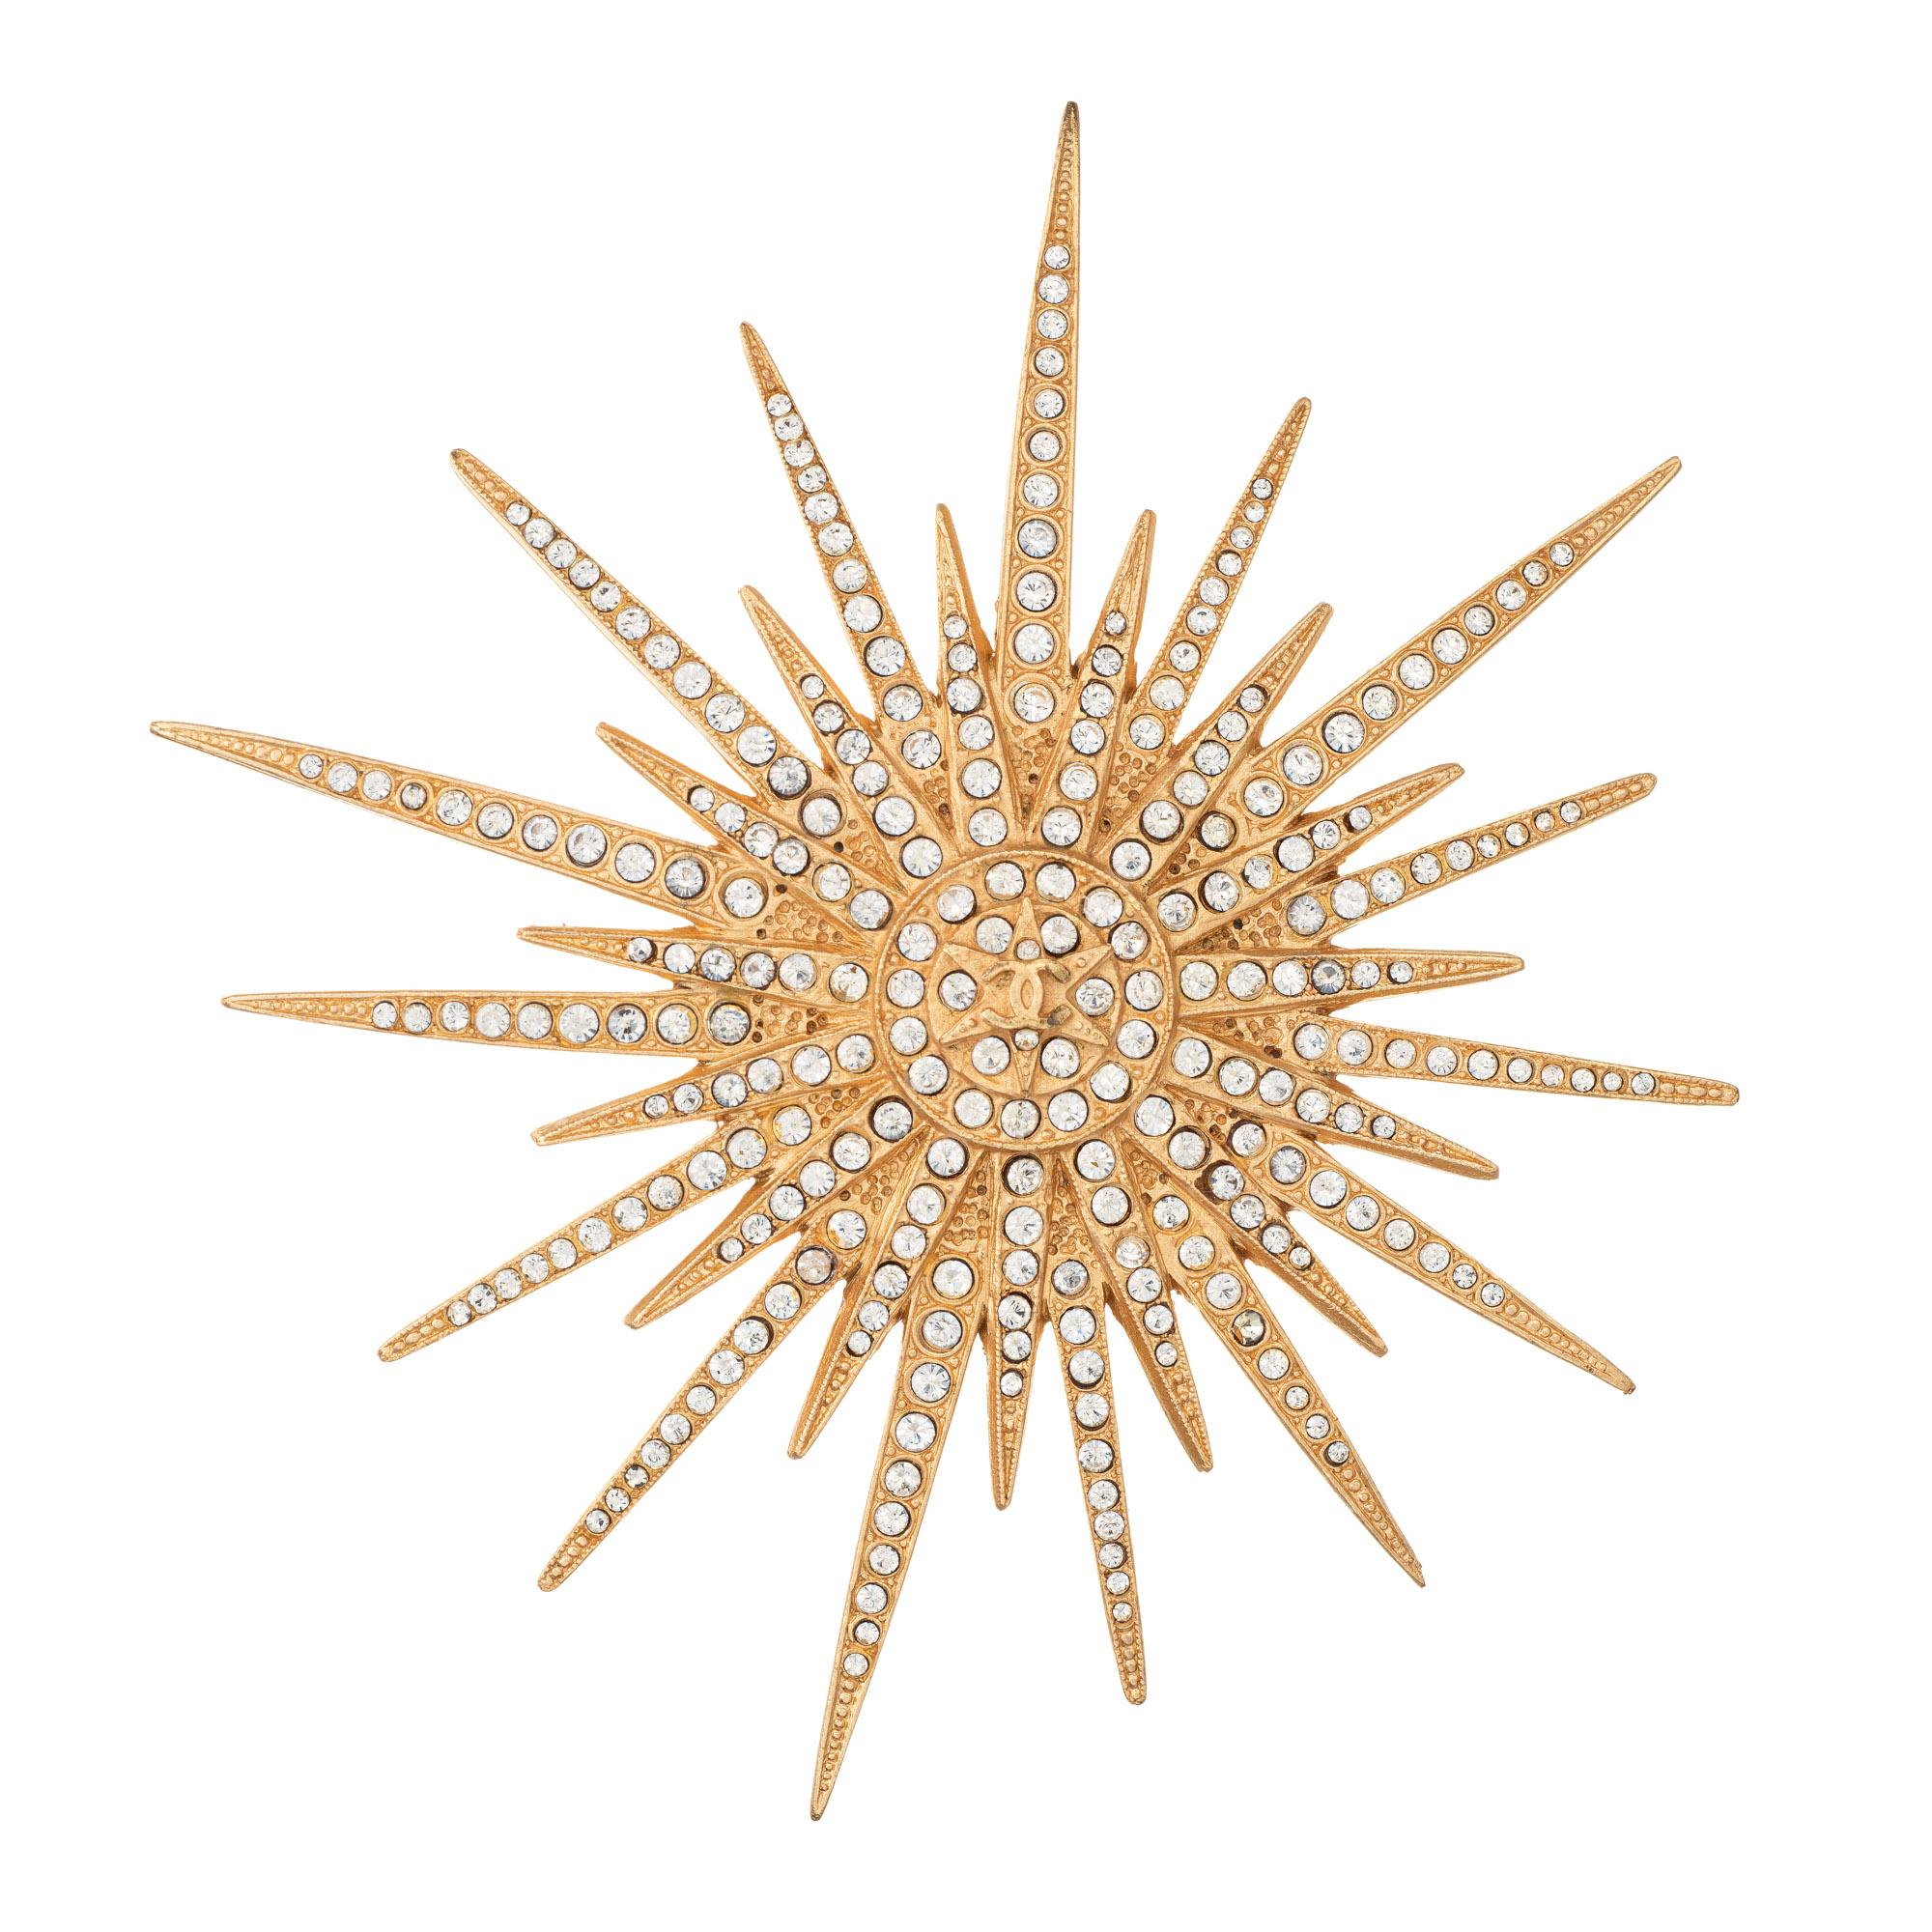 Modern Vintage Chanel Starburst Brooch Pin c2001 Large Crystal Yellow Gold Tone   For Sale